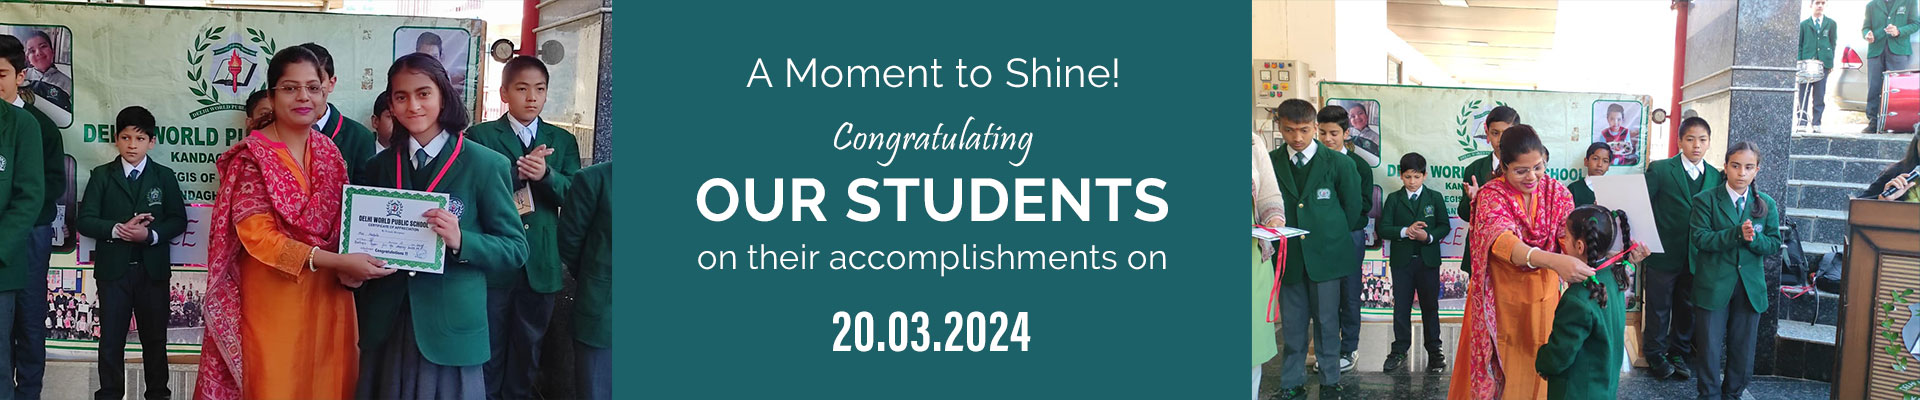 A Moment to Shine! Congratulating our students on their accomplishments on 20.03.2024